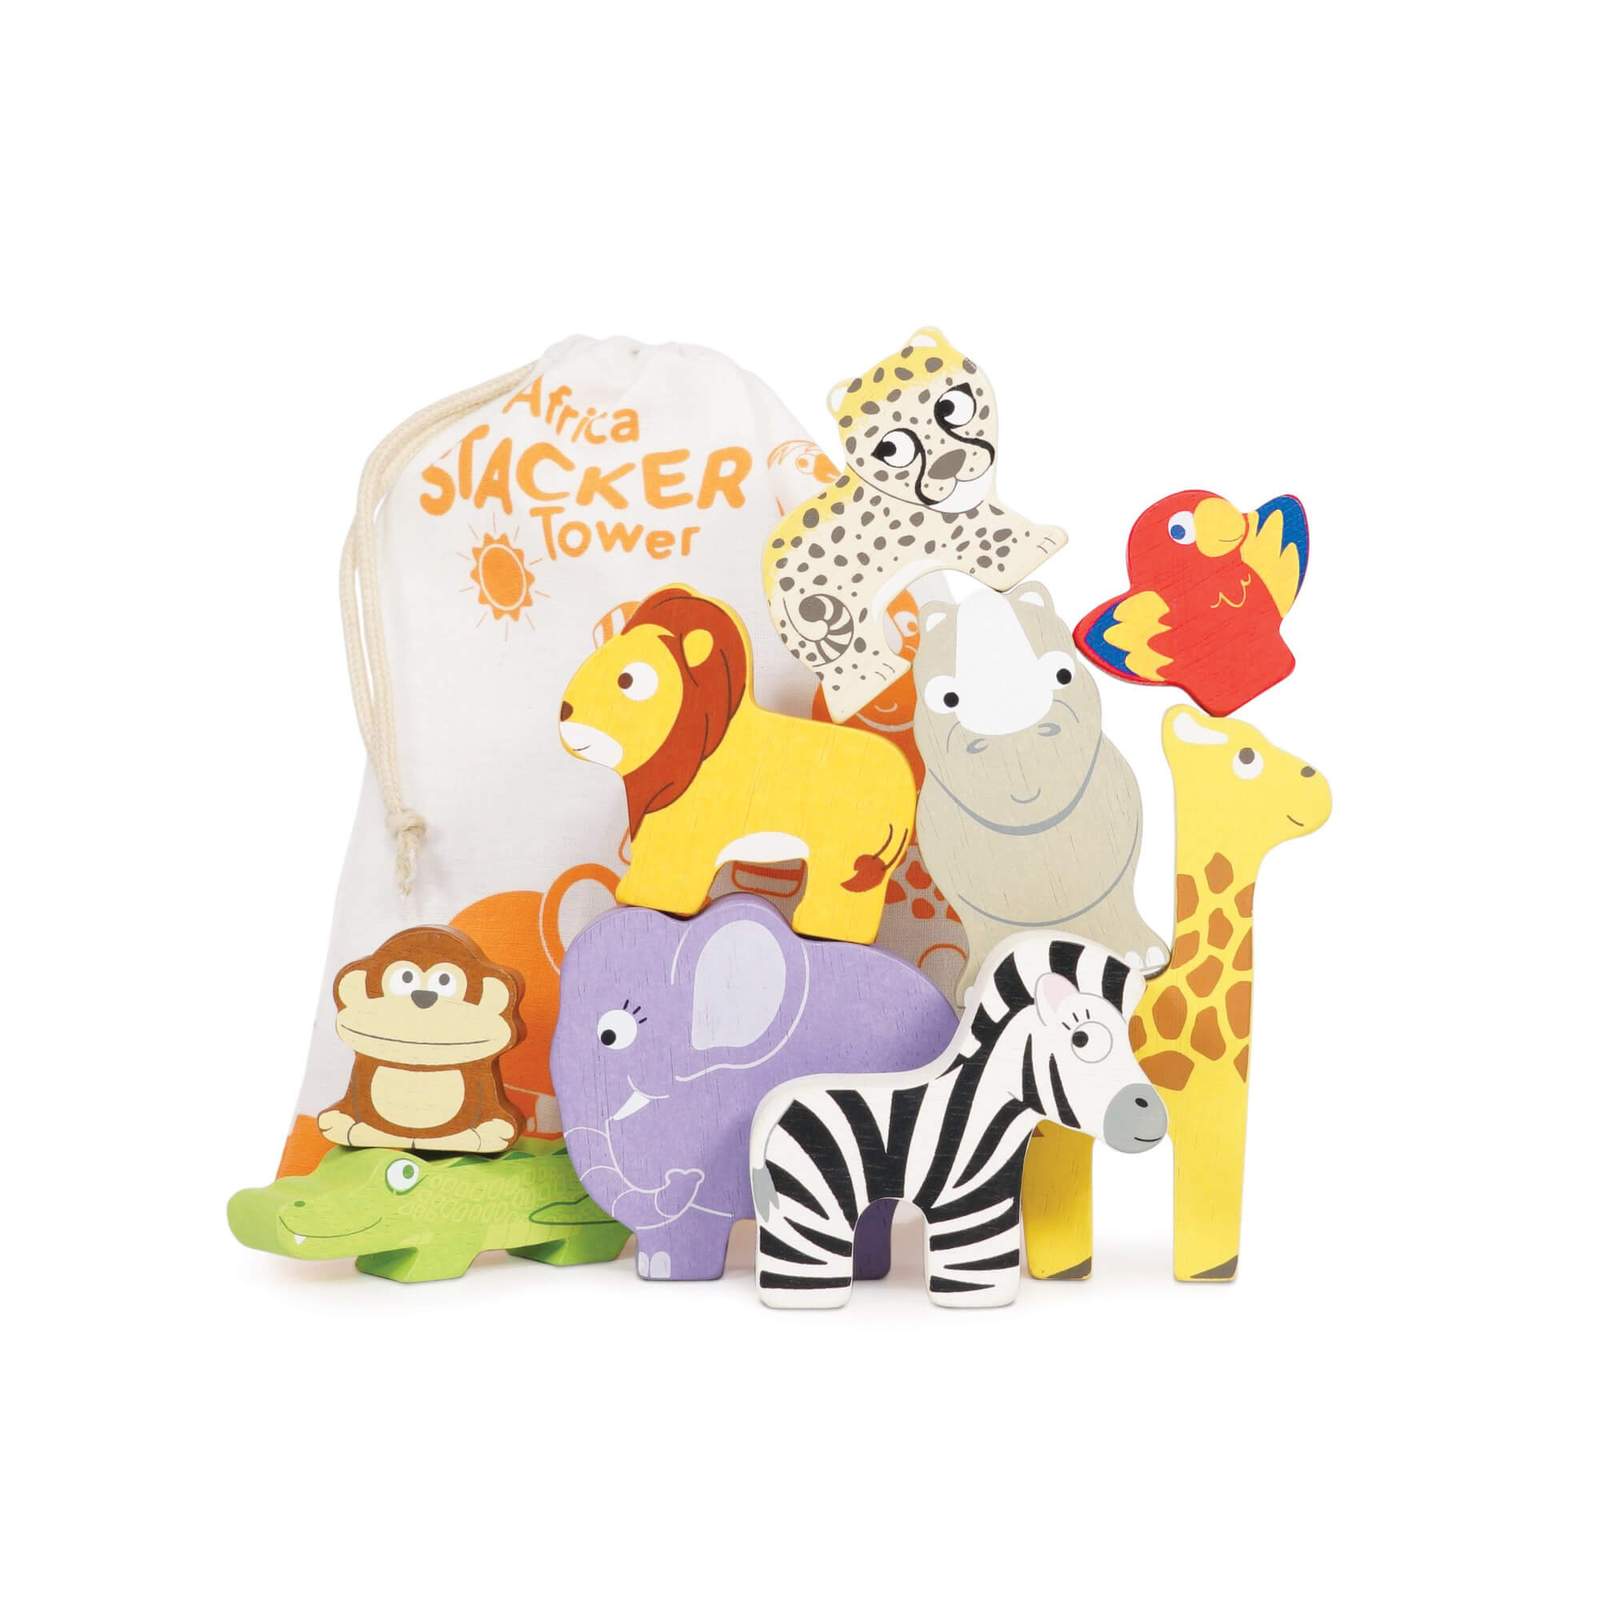 Tite-chouette-toys-PL117-Africa-Stacker-Cotton-Bag-Stack-and-Tumble-Wooden-Toy-1_1600x